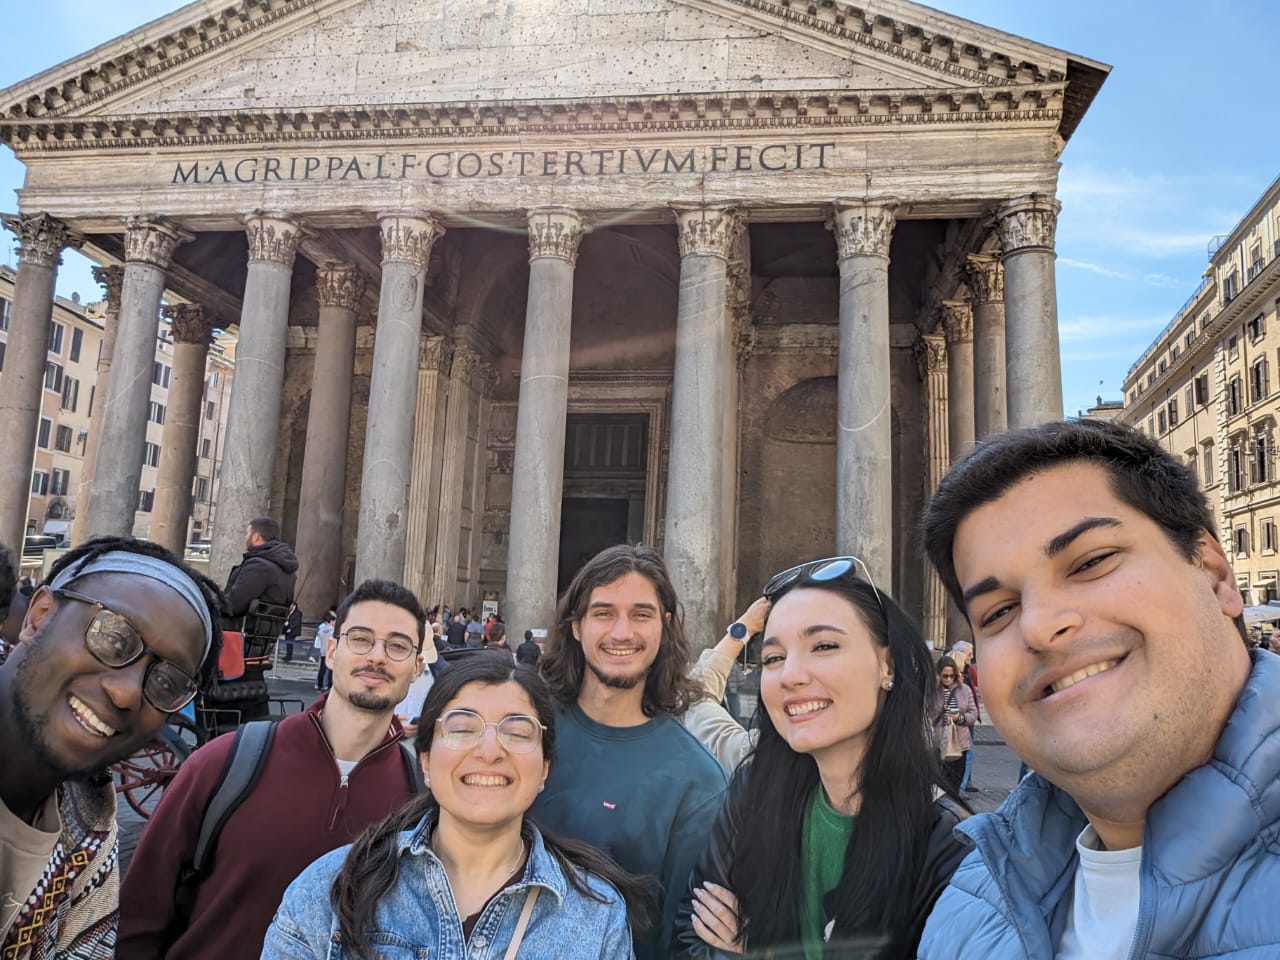 Students in Rome for their second semester